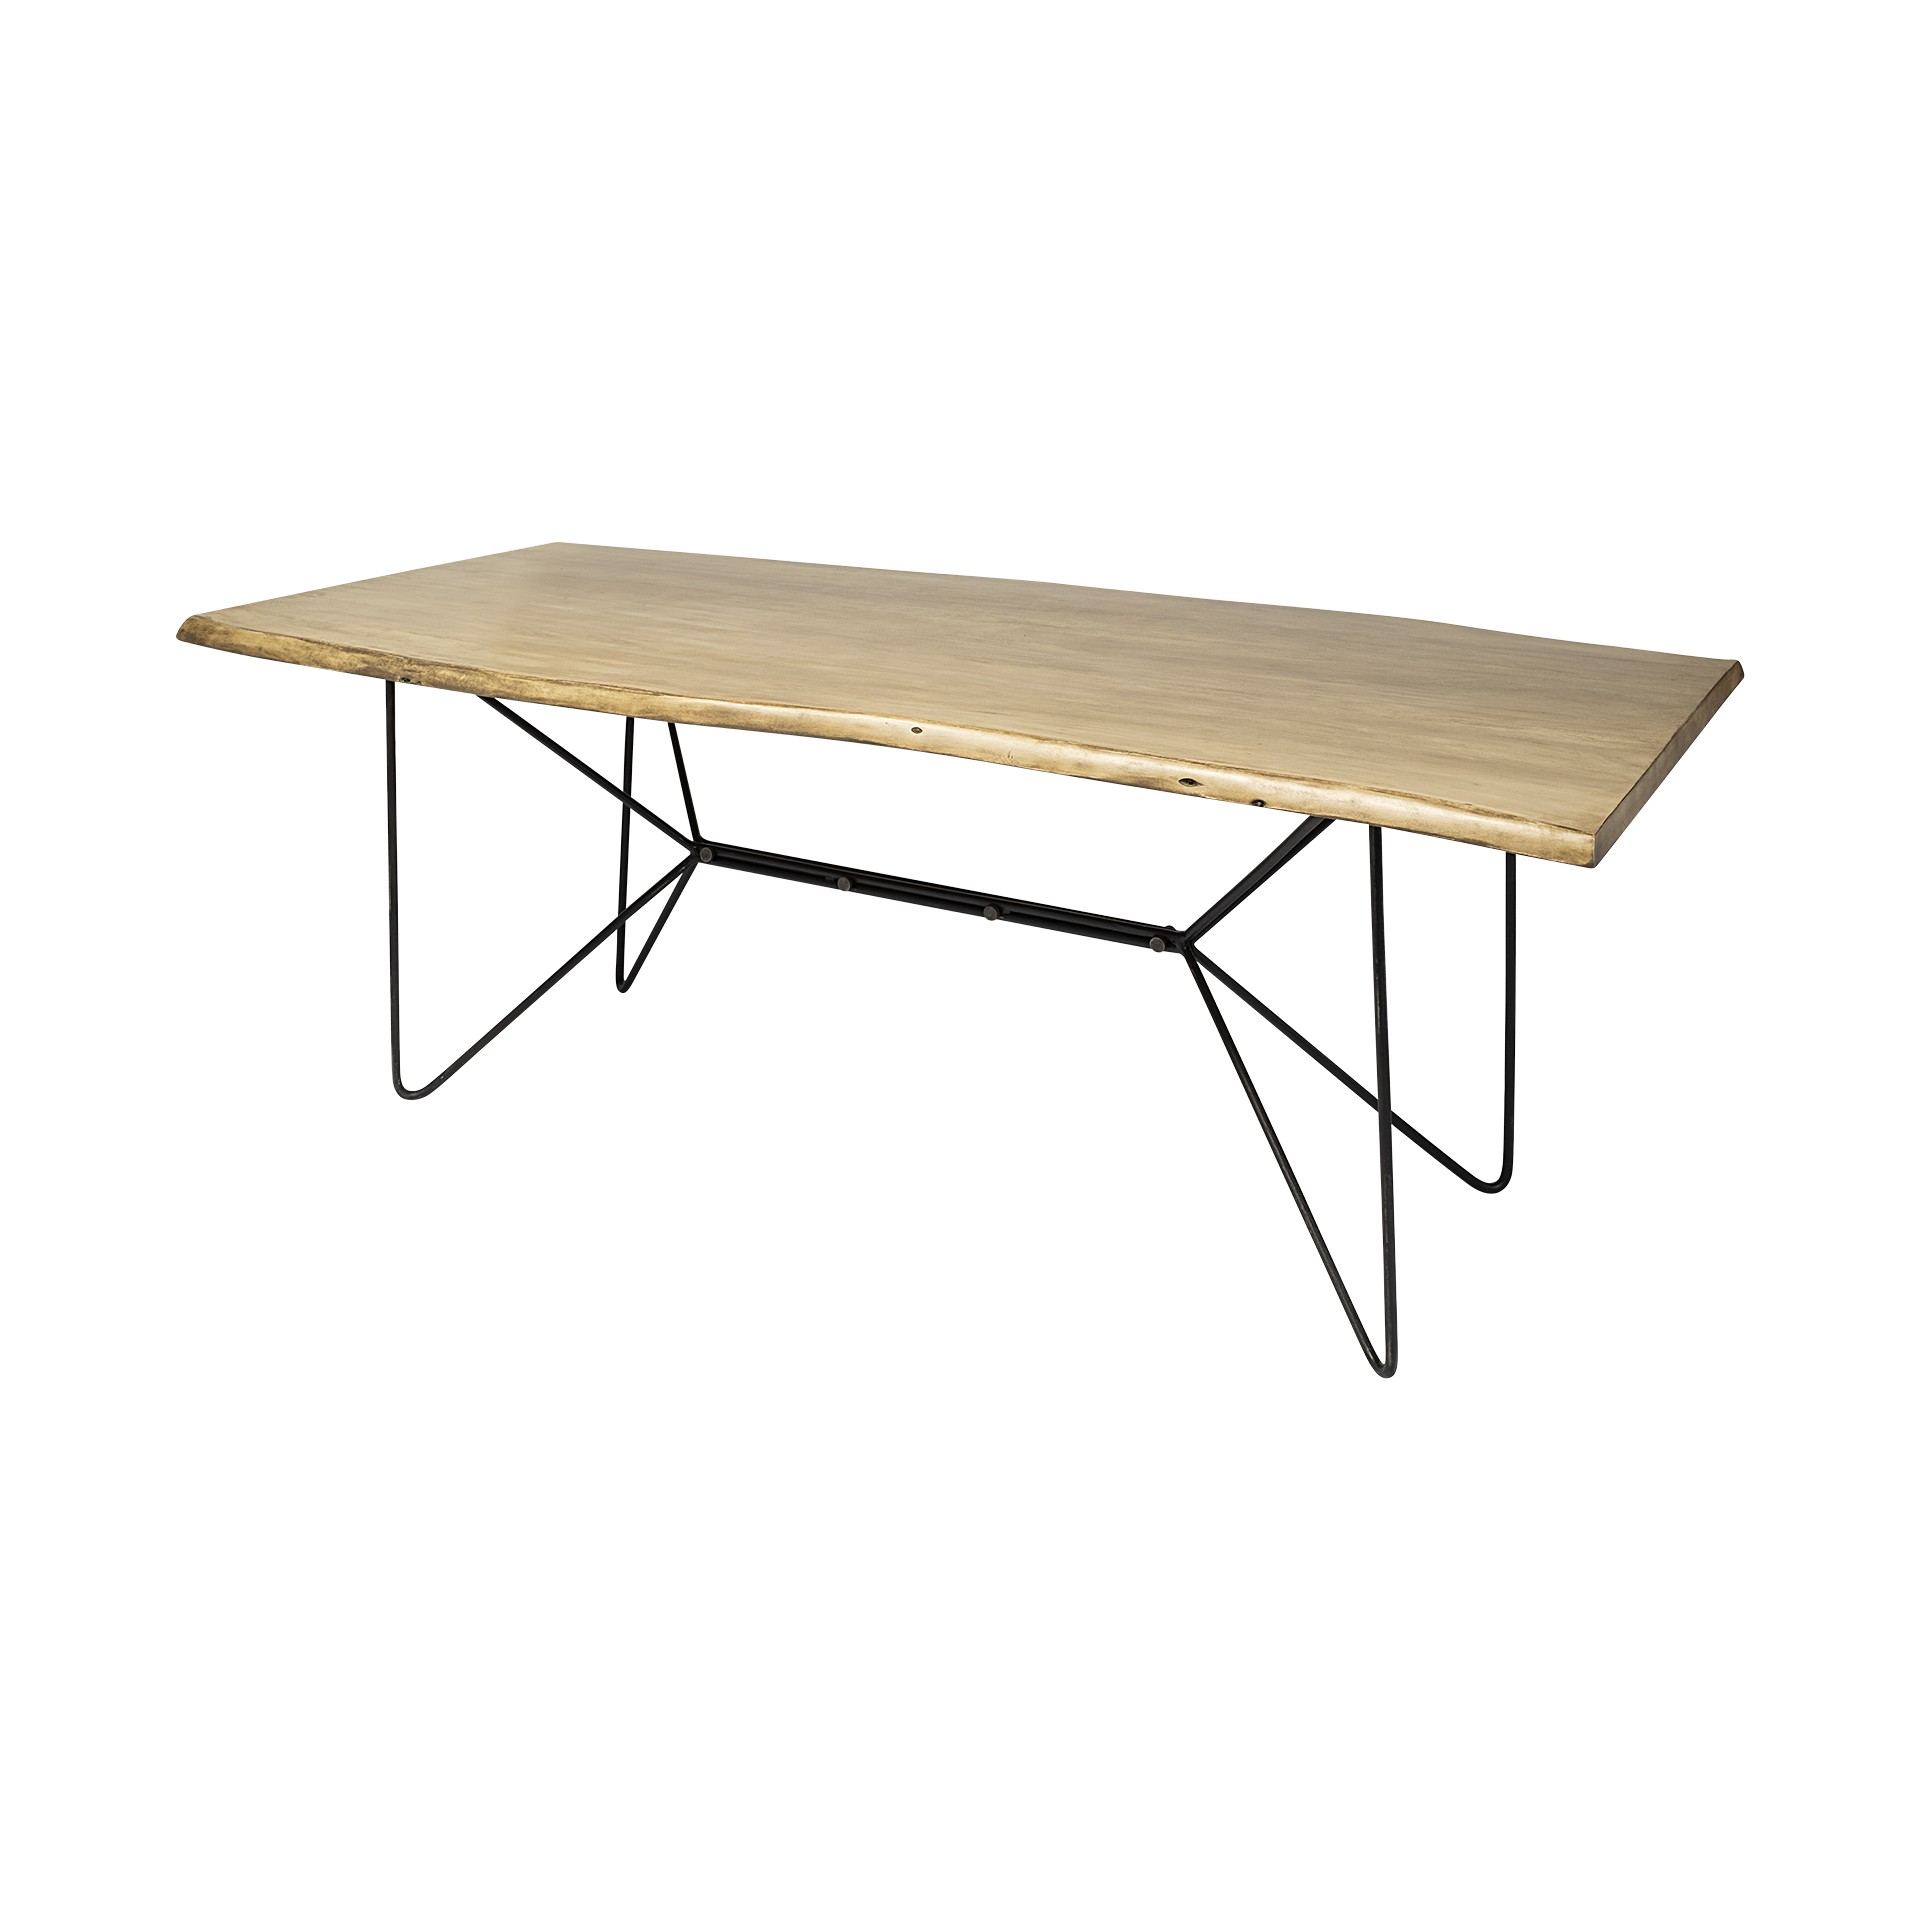 84x40 Rectangular Blonde Live Edge Sold Wood Top with Black Metal Base Dining Table